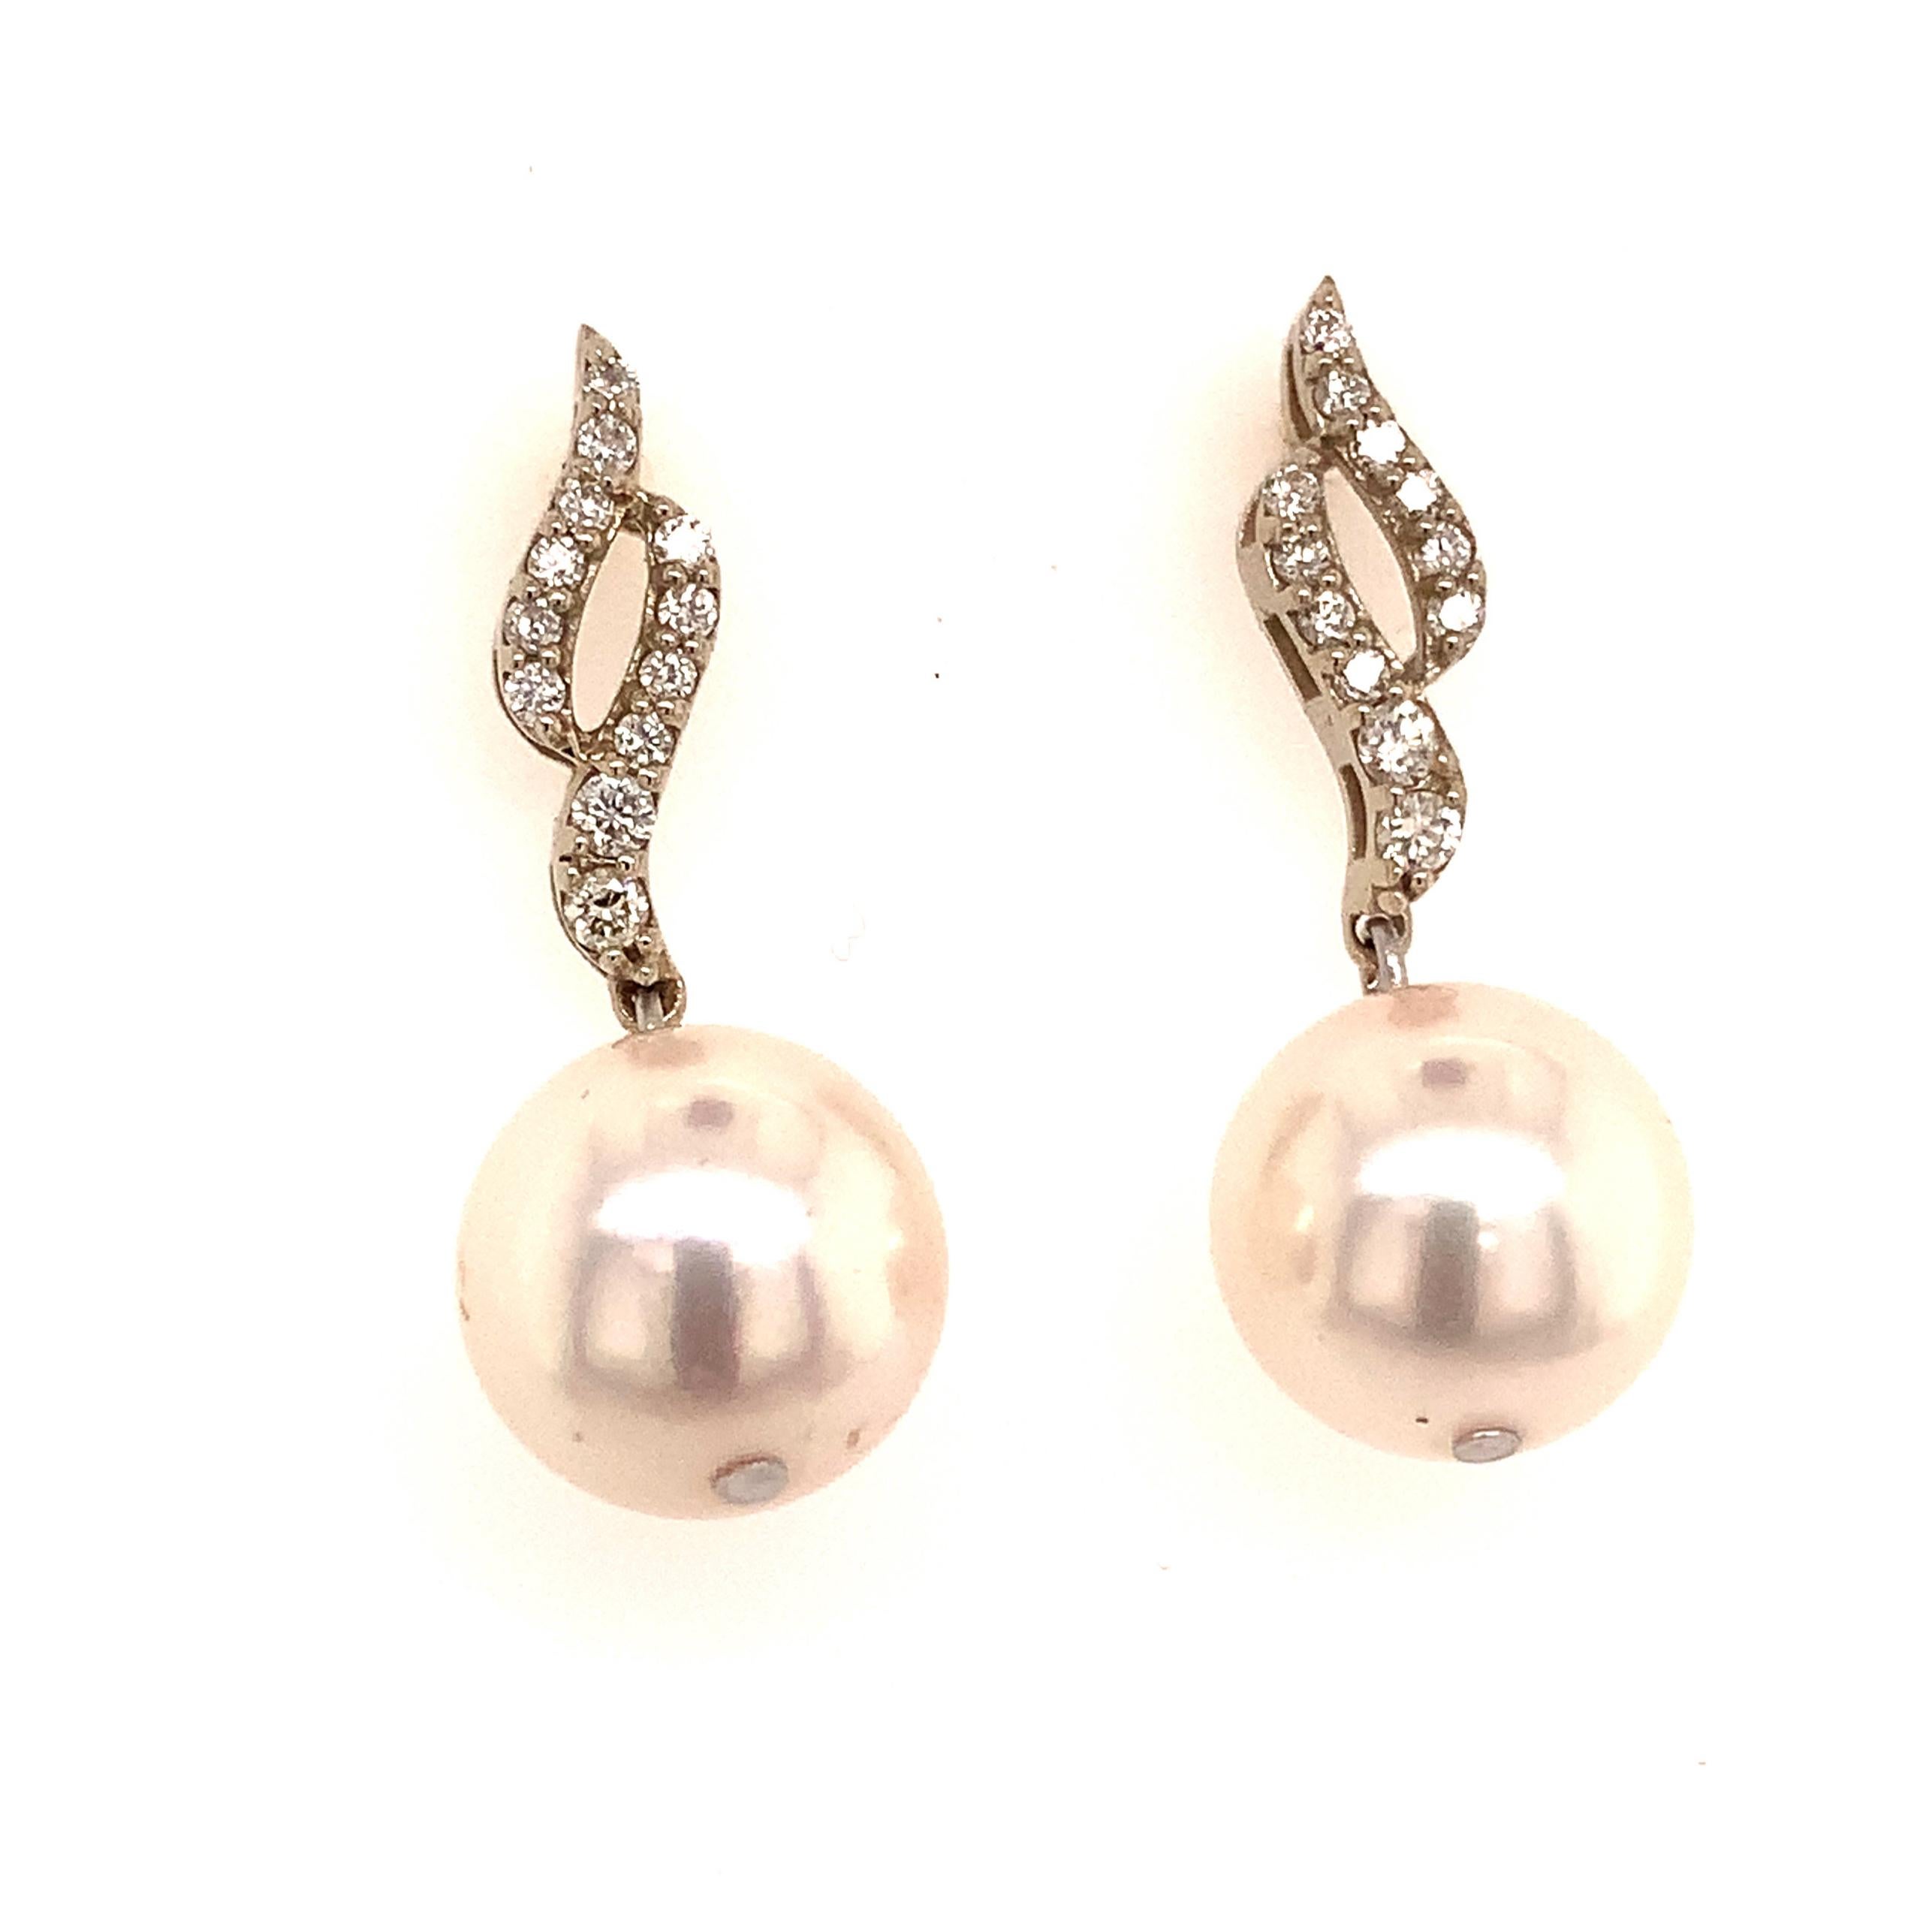 Fine Quality Akoya Pearl Diamond Dangle Earrings 14k Gold 9.2 mm Certified $1,990 114460

This is a Unique Custom Made Glamorous Piece of Jewelry!

Nothing says, “I Love you” more than Diamonds and Pearls!

These Akoya pearl earrings have been